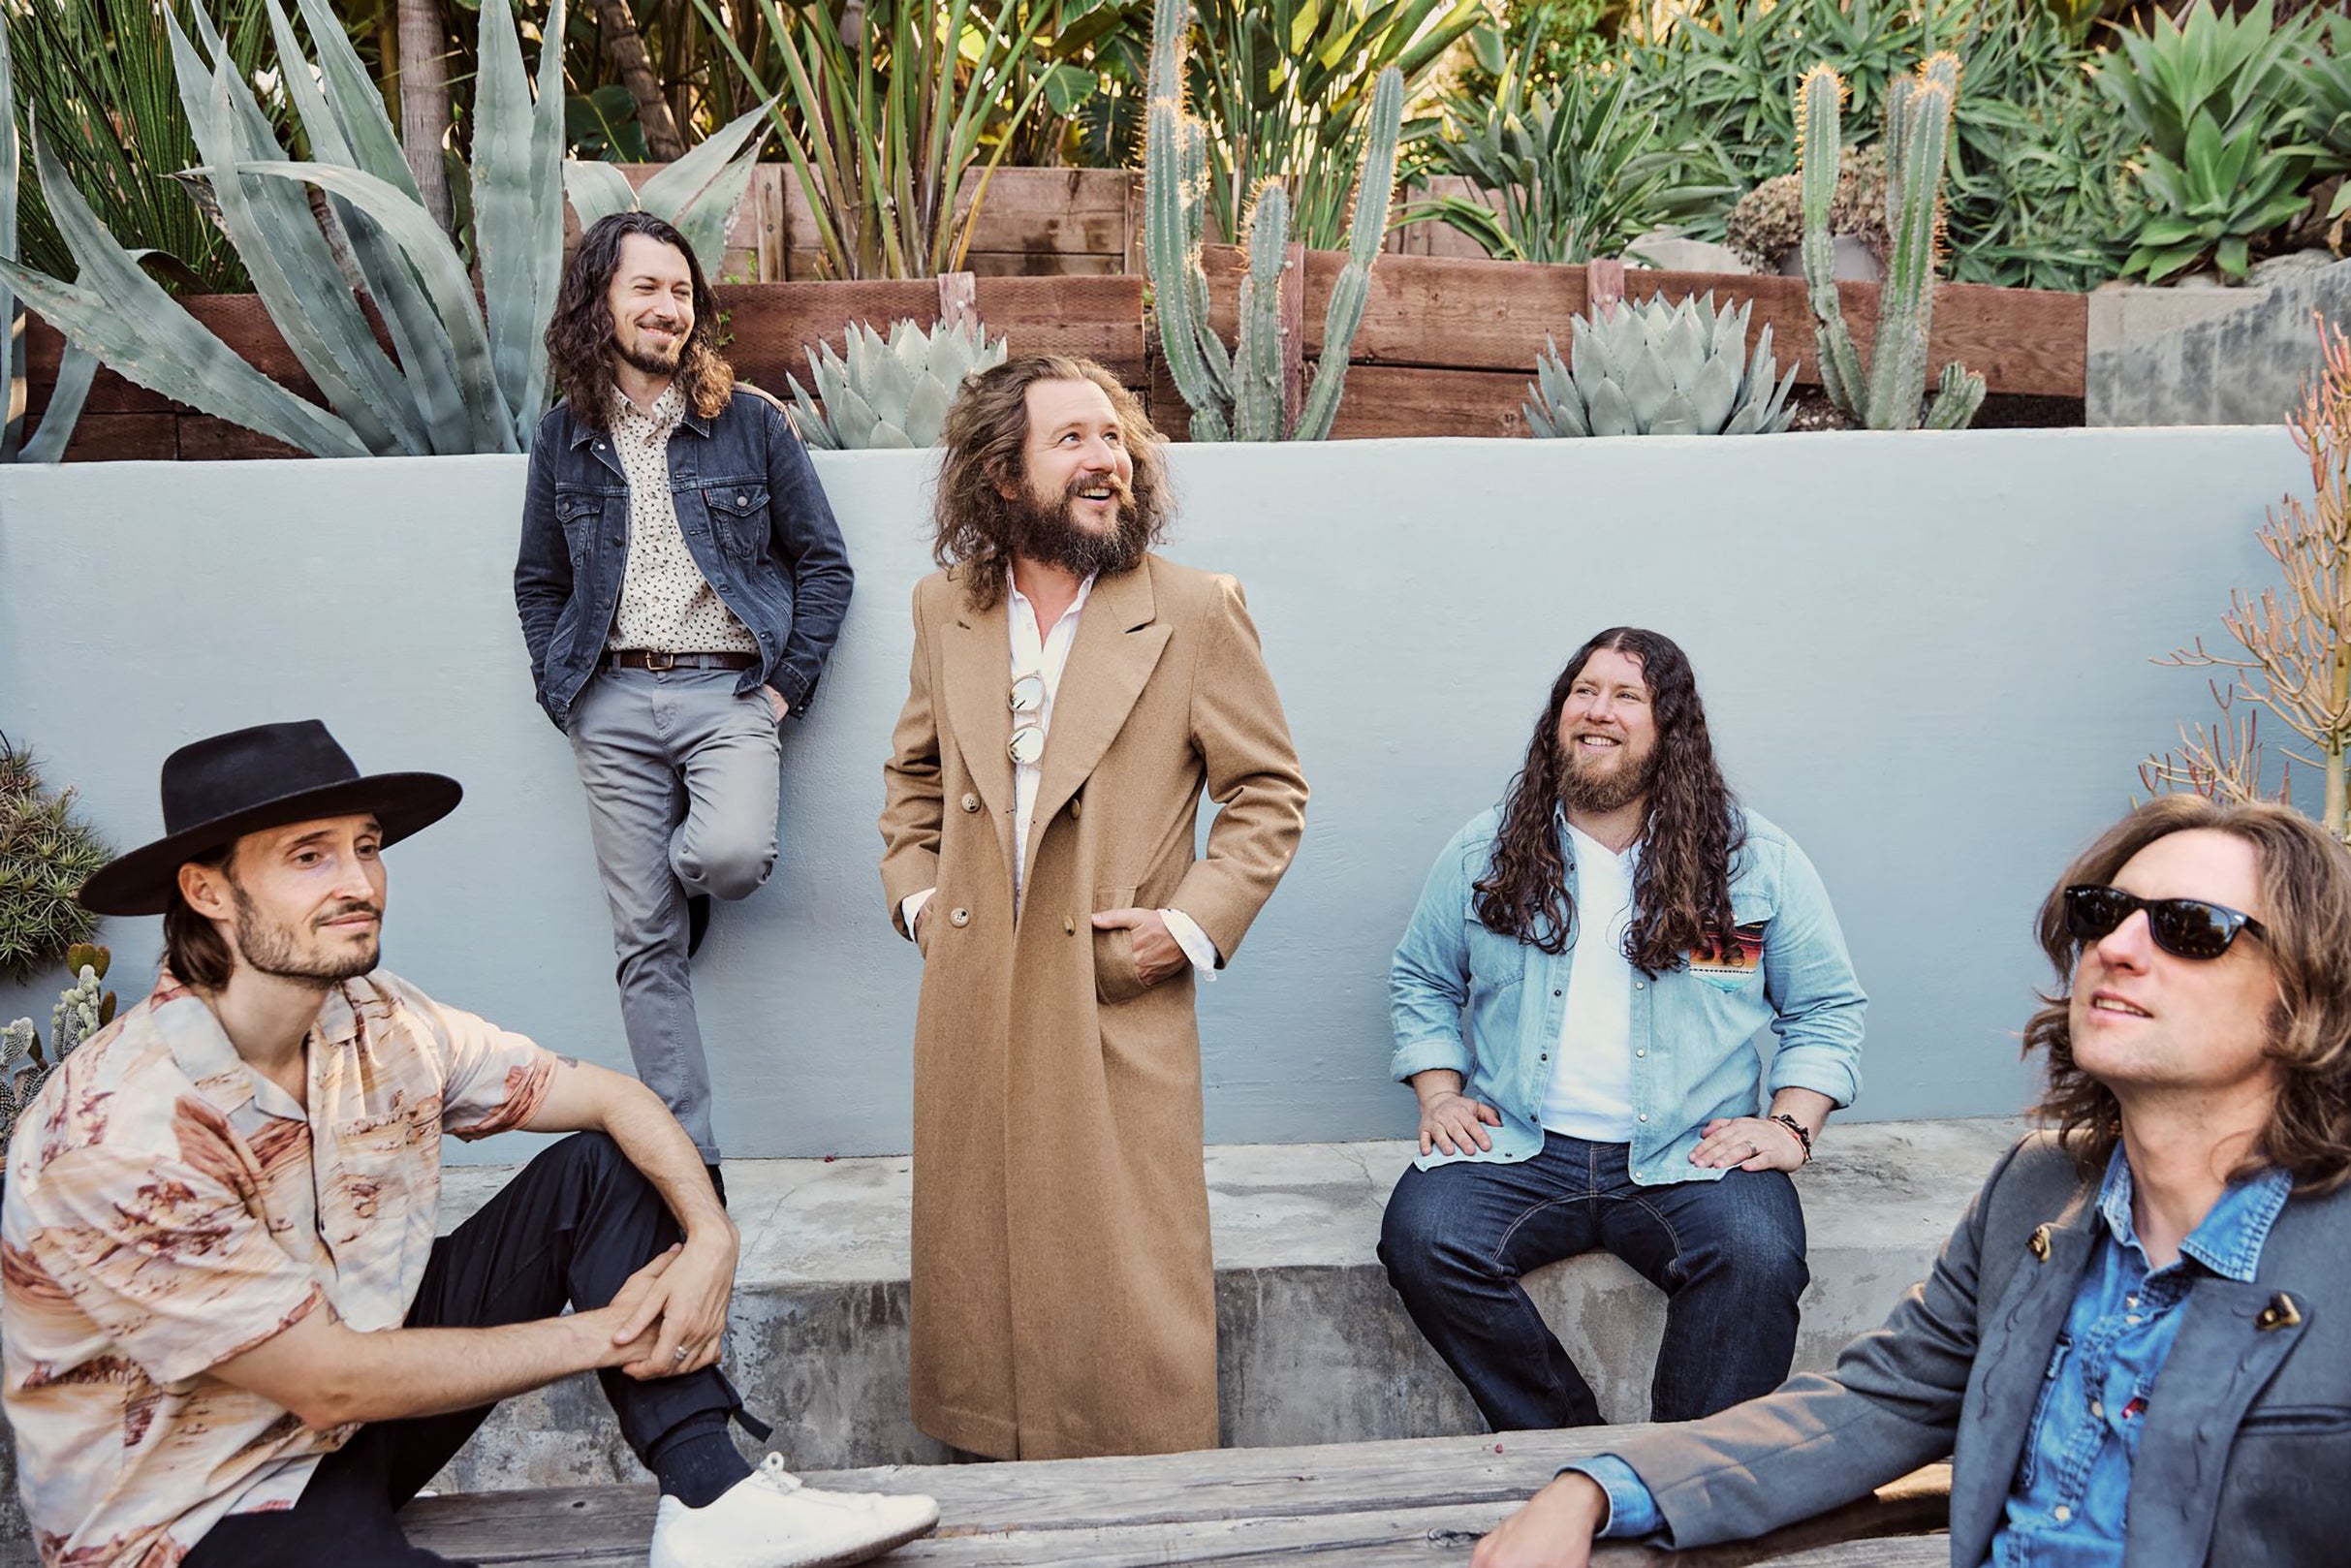 Eye To Eye Tour - My Morning Jacket and Nathaniel Rateliff & TNS presale code for real tickets in Alpharetta